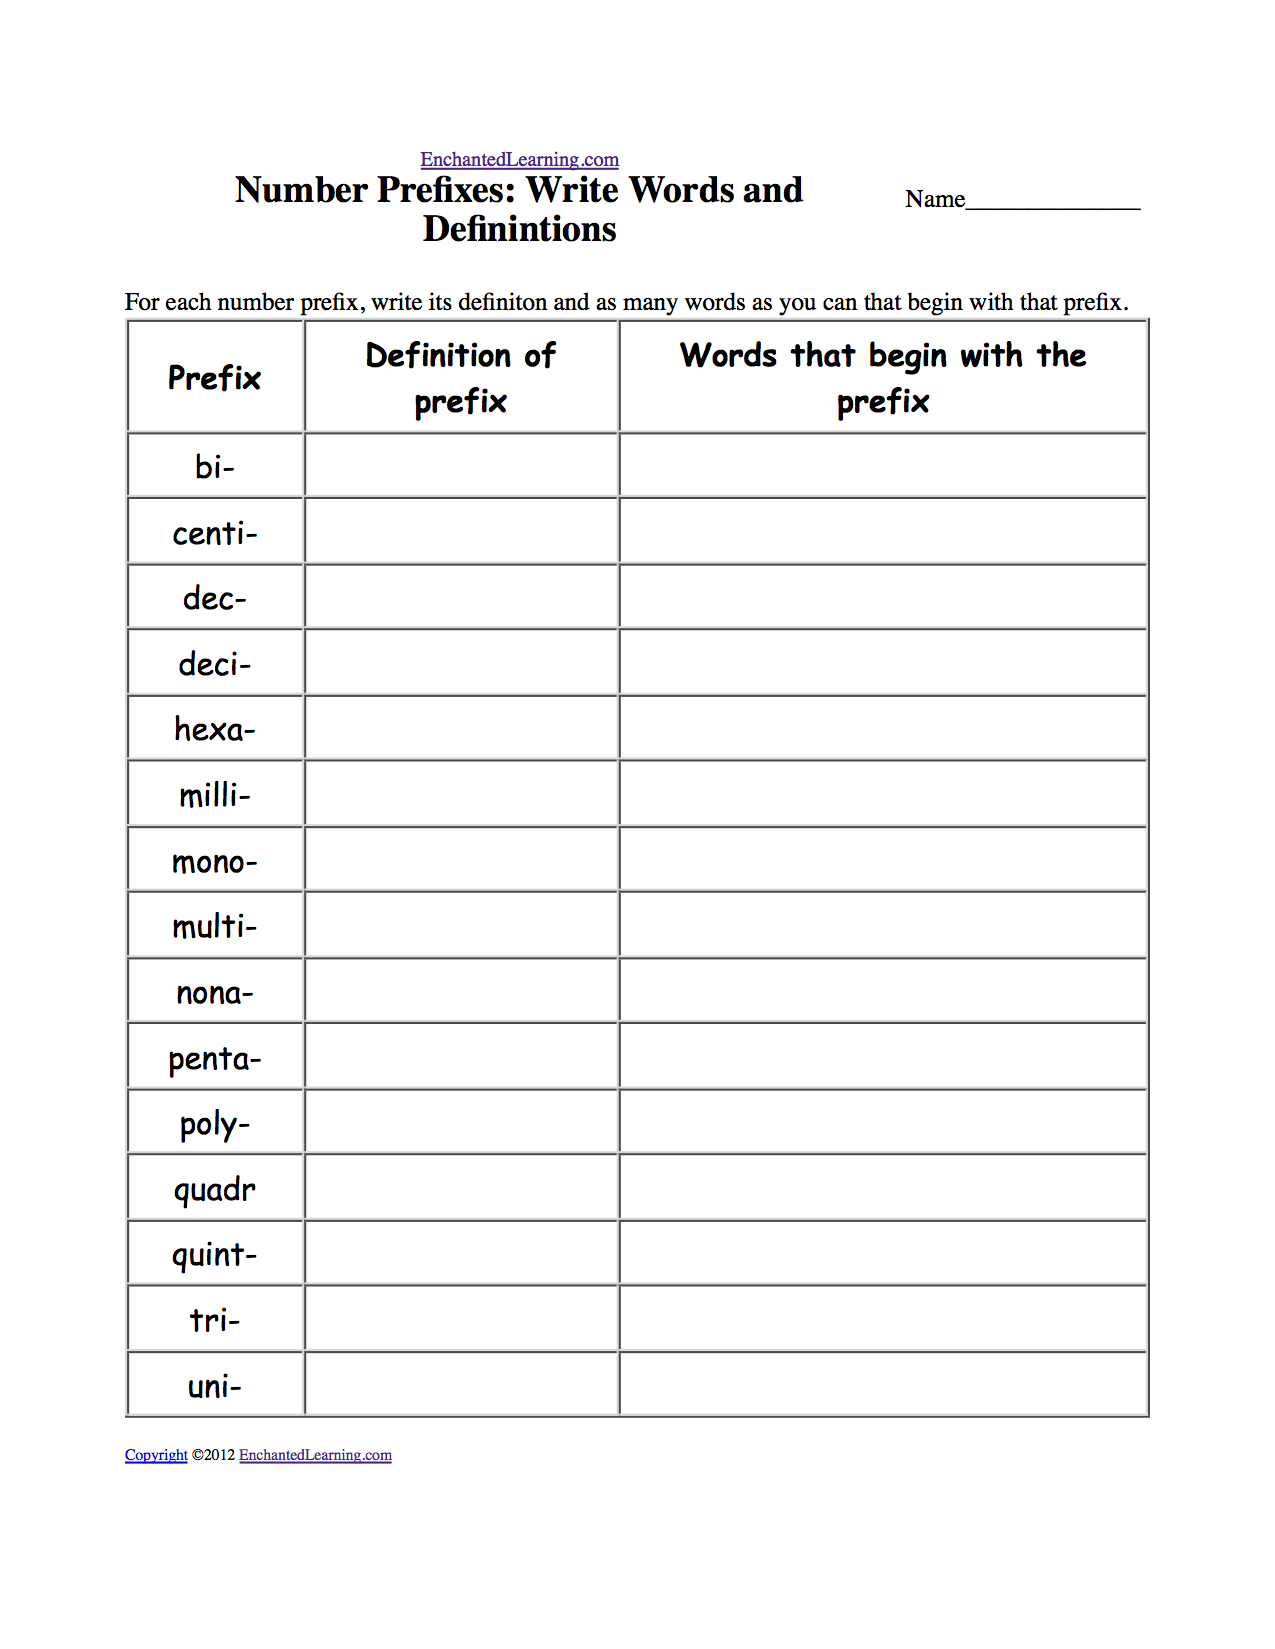 Write Words Given Number Prefixes